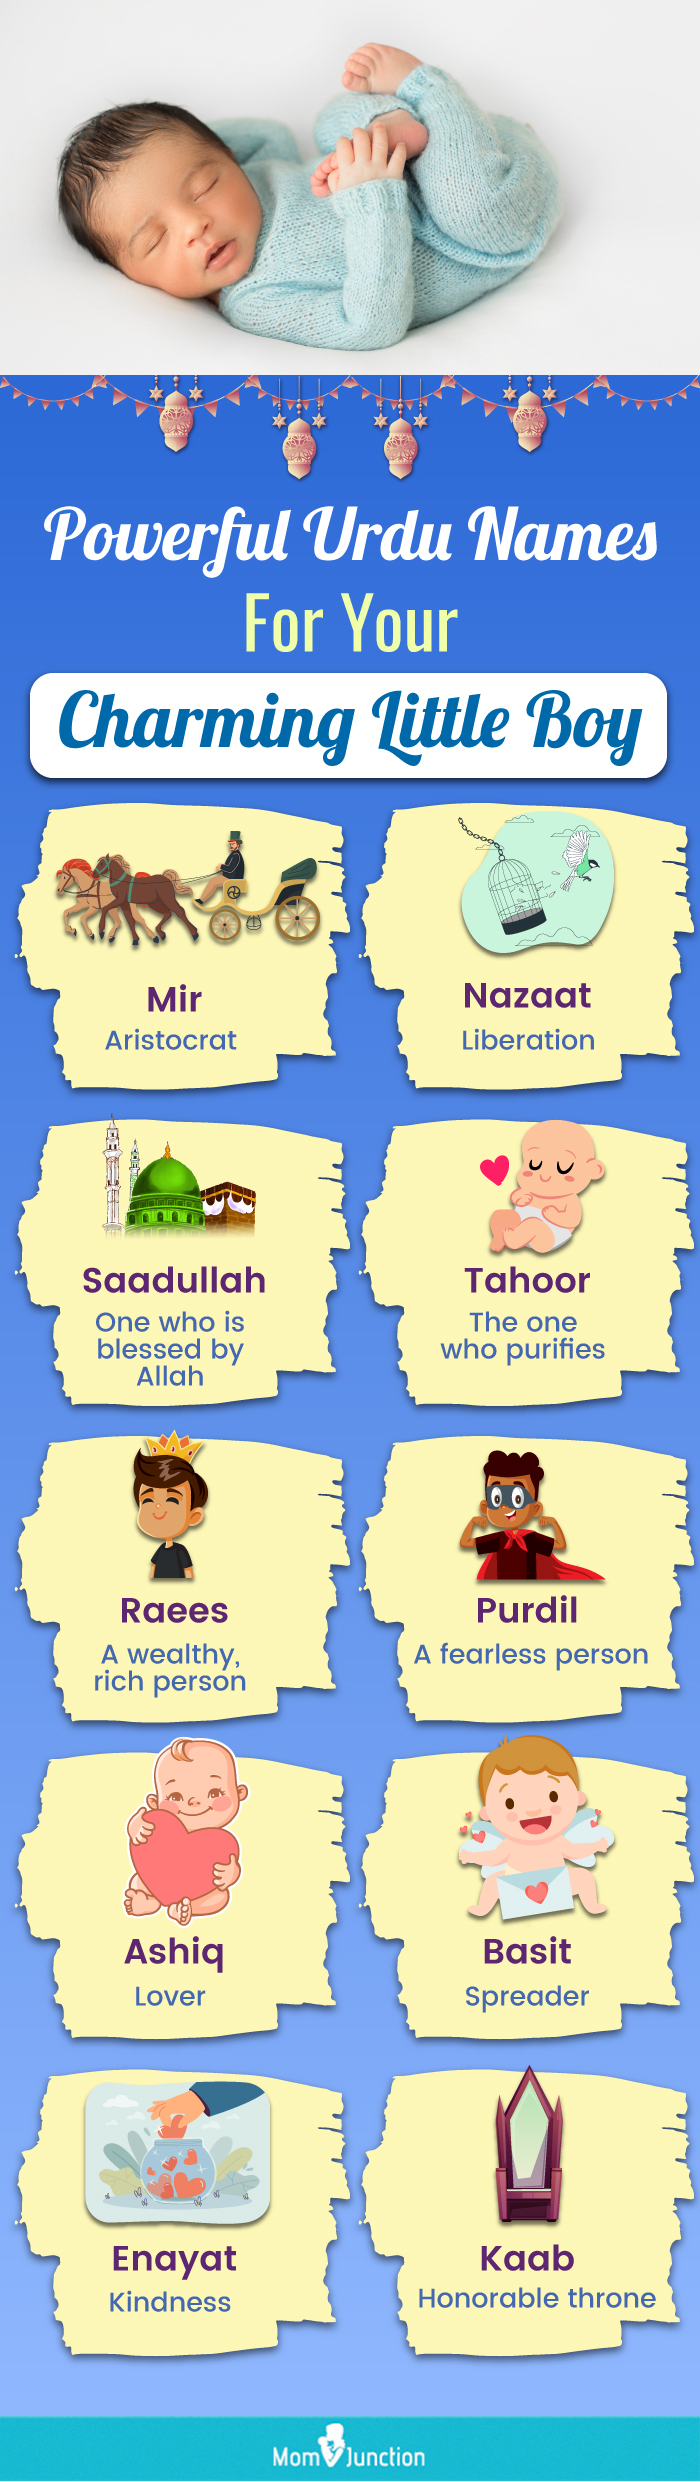 Powerful Urdu Names For Your Charming Little Boy 